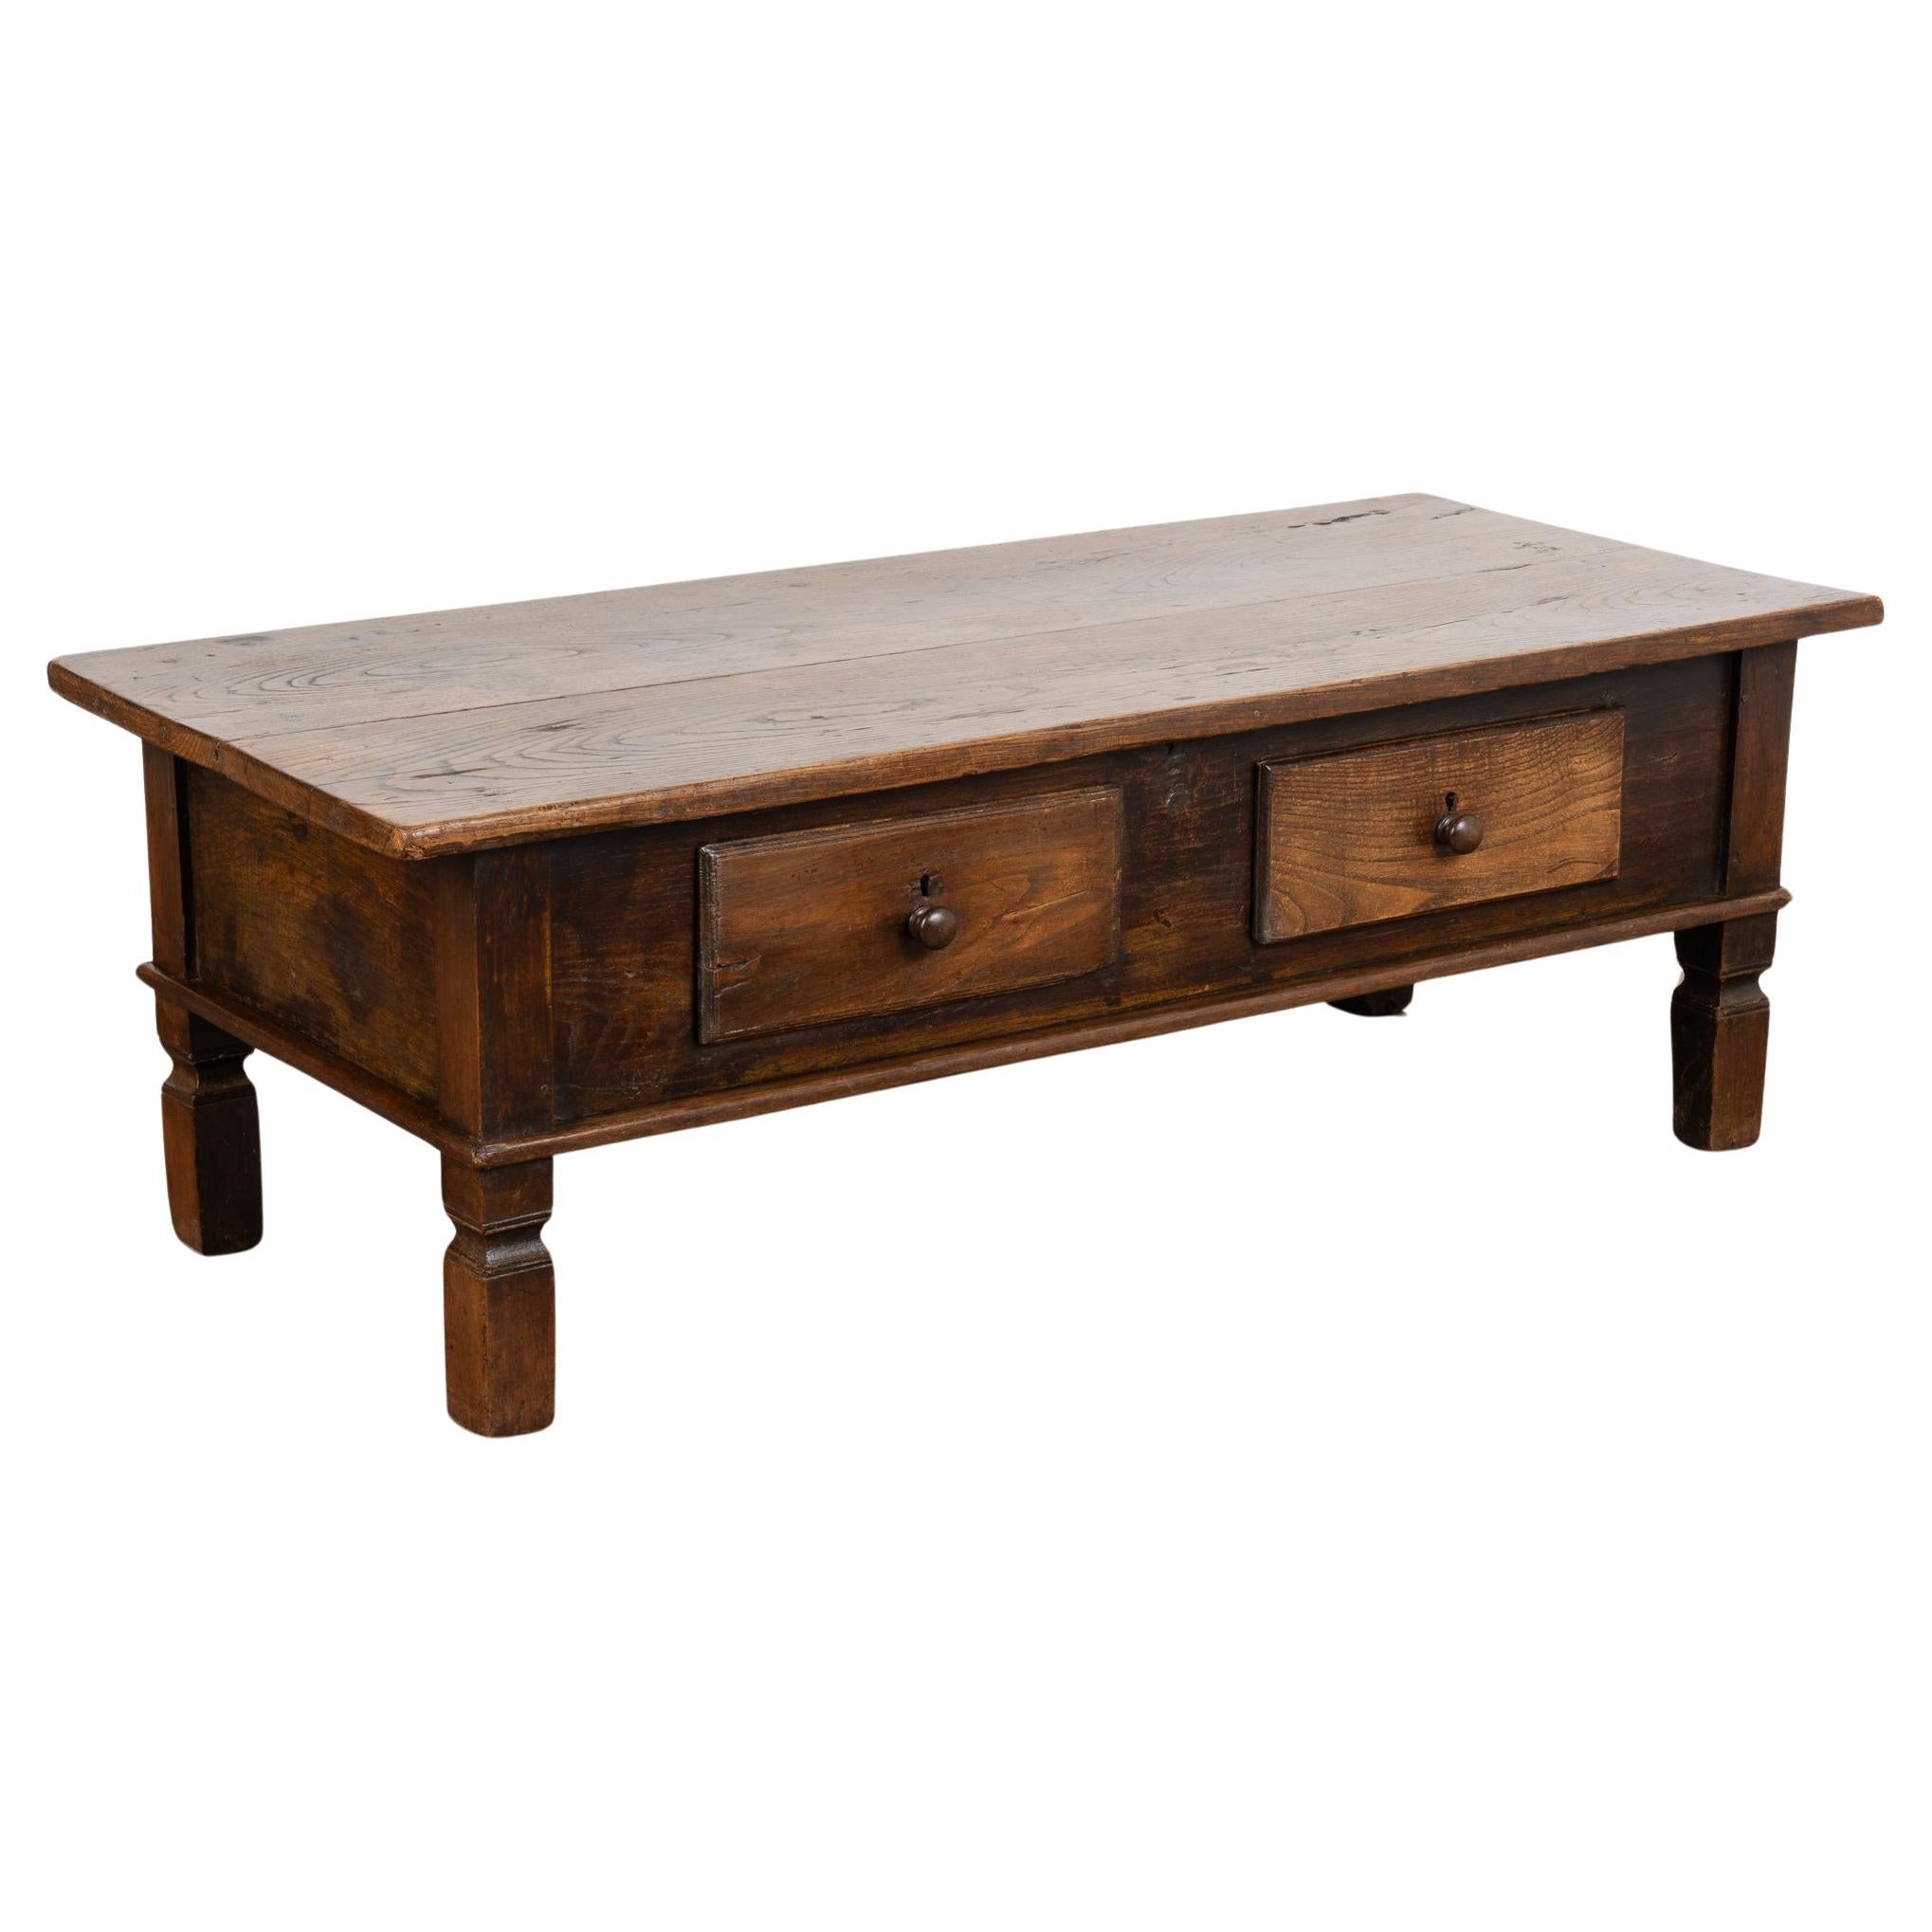 Two Drawer French Country Oak Coffee Table, circa 1820-40 For Sale